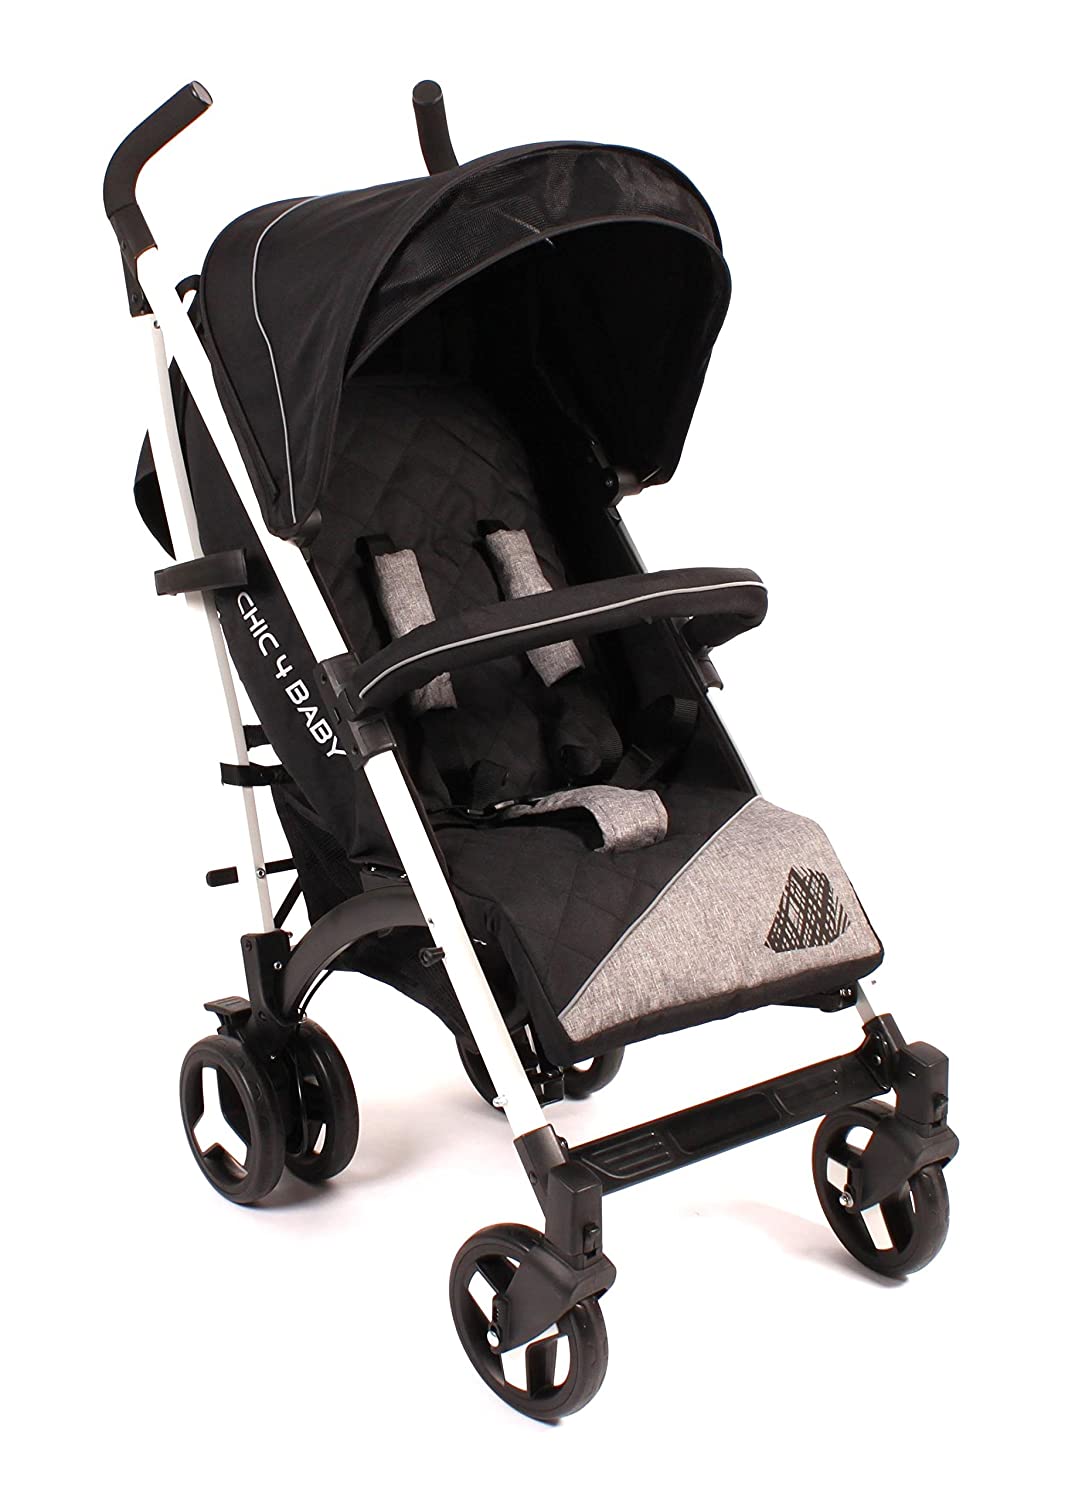 Chic 4 Baby Luca Buggy 2018 black